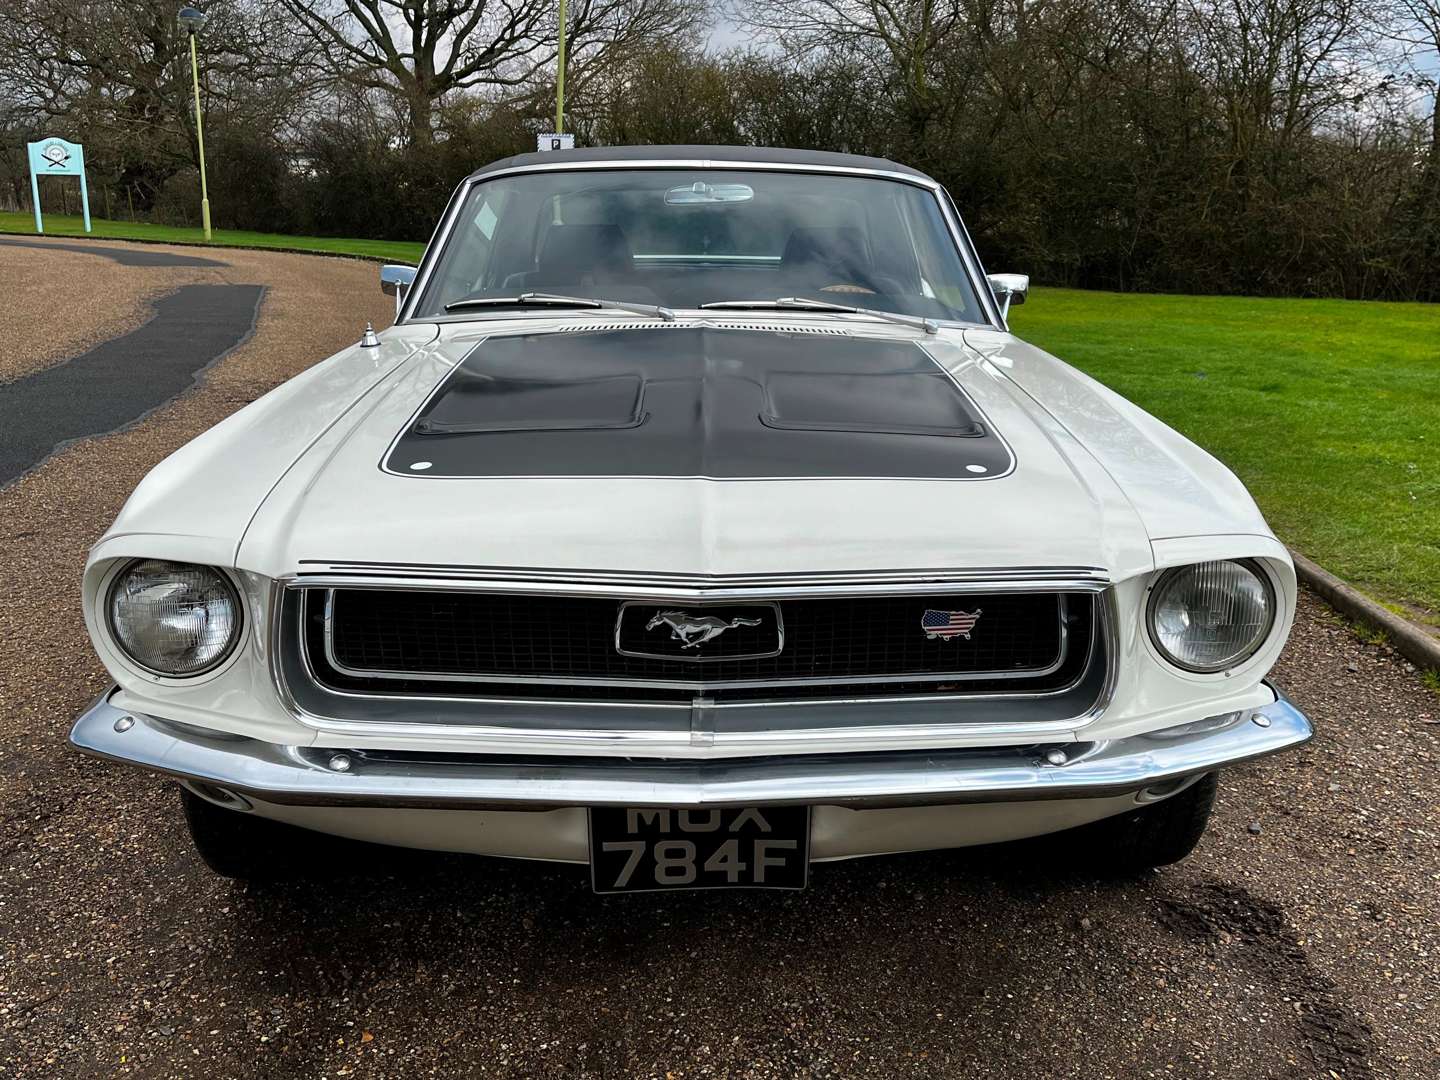 1968 FORD MUSTANG 5.0 V8 AUTO COUPE LHD - Image 2 of 29